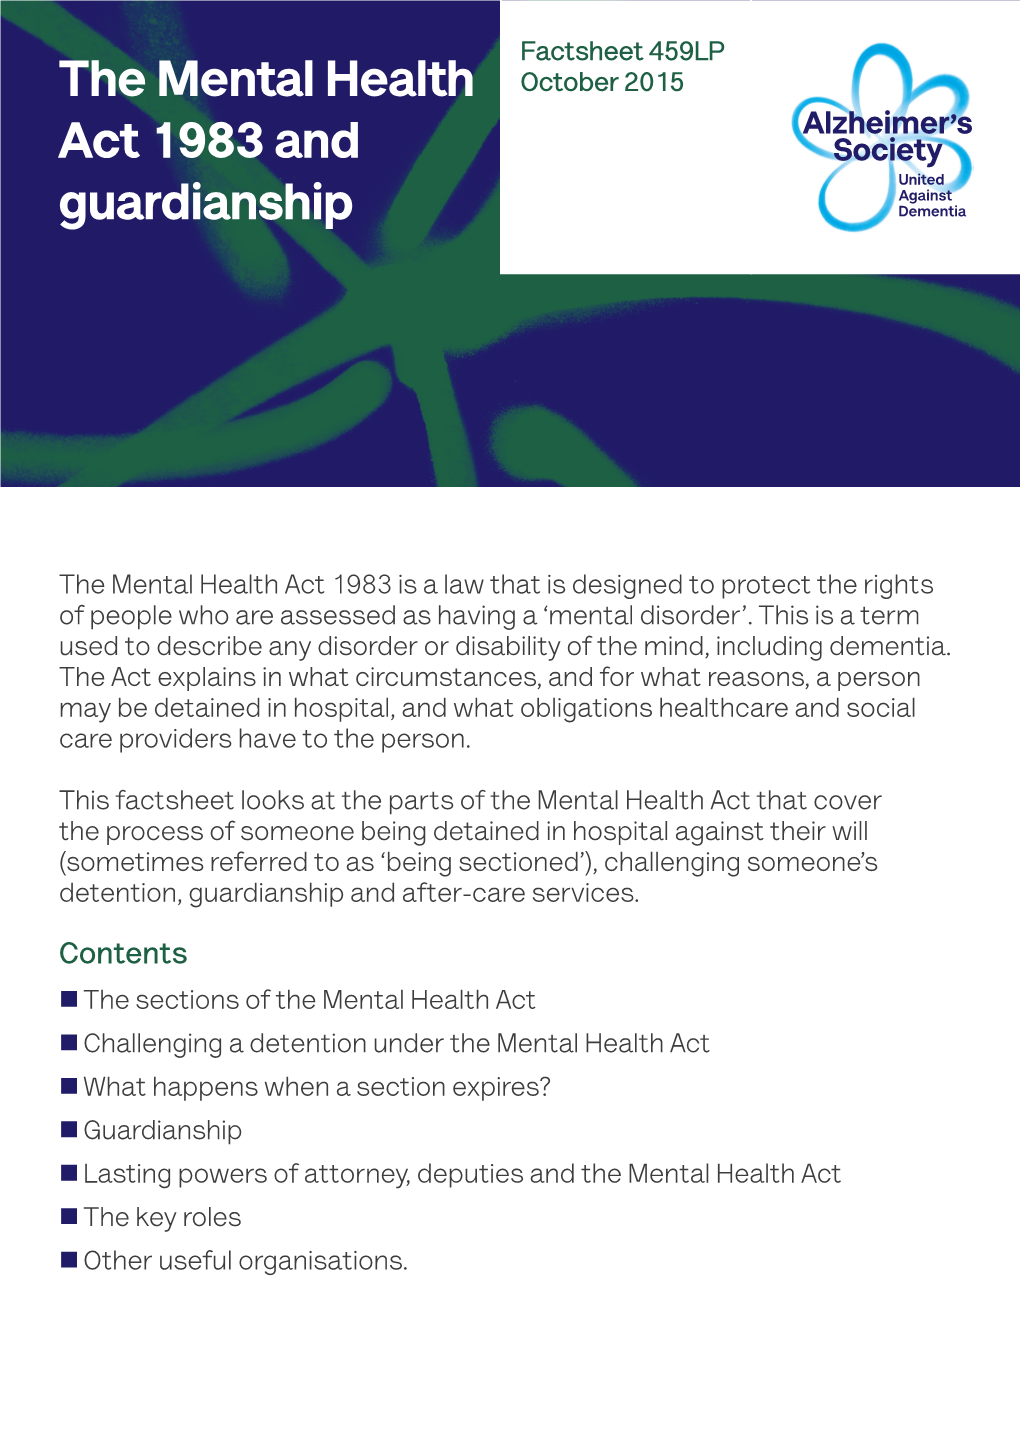 The Mental Health Act 1983 and Guardianship